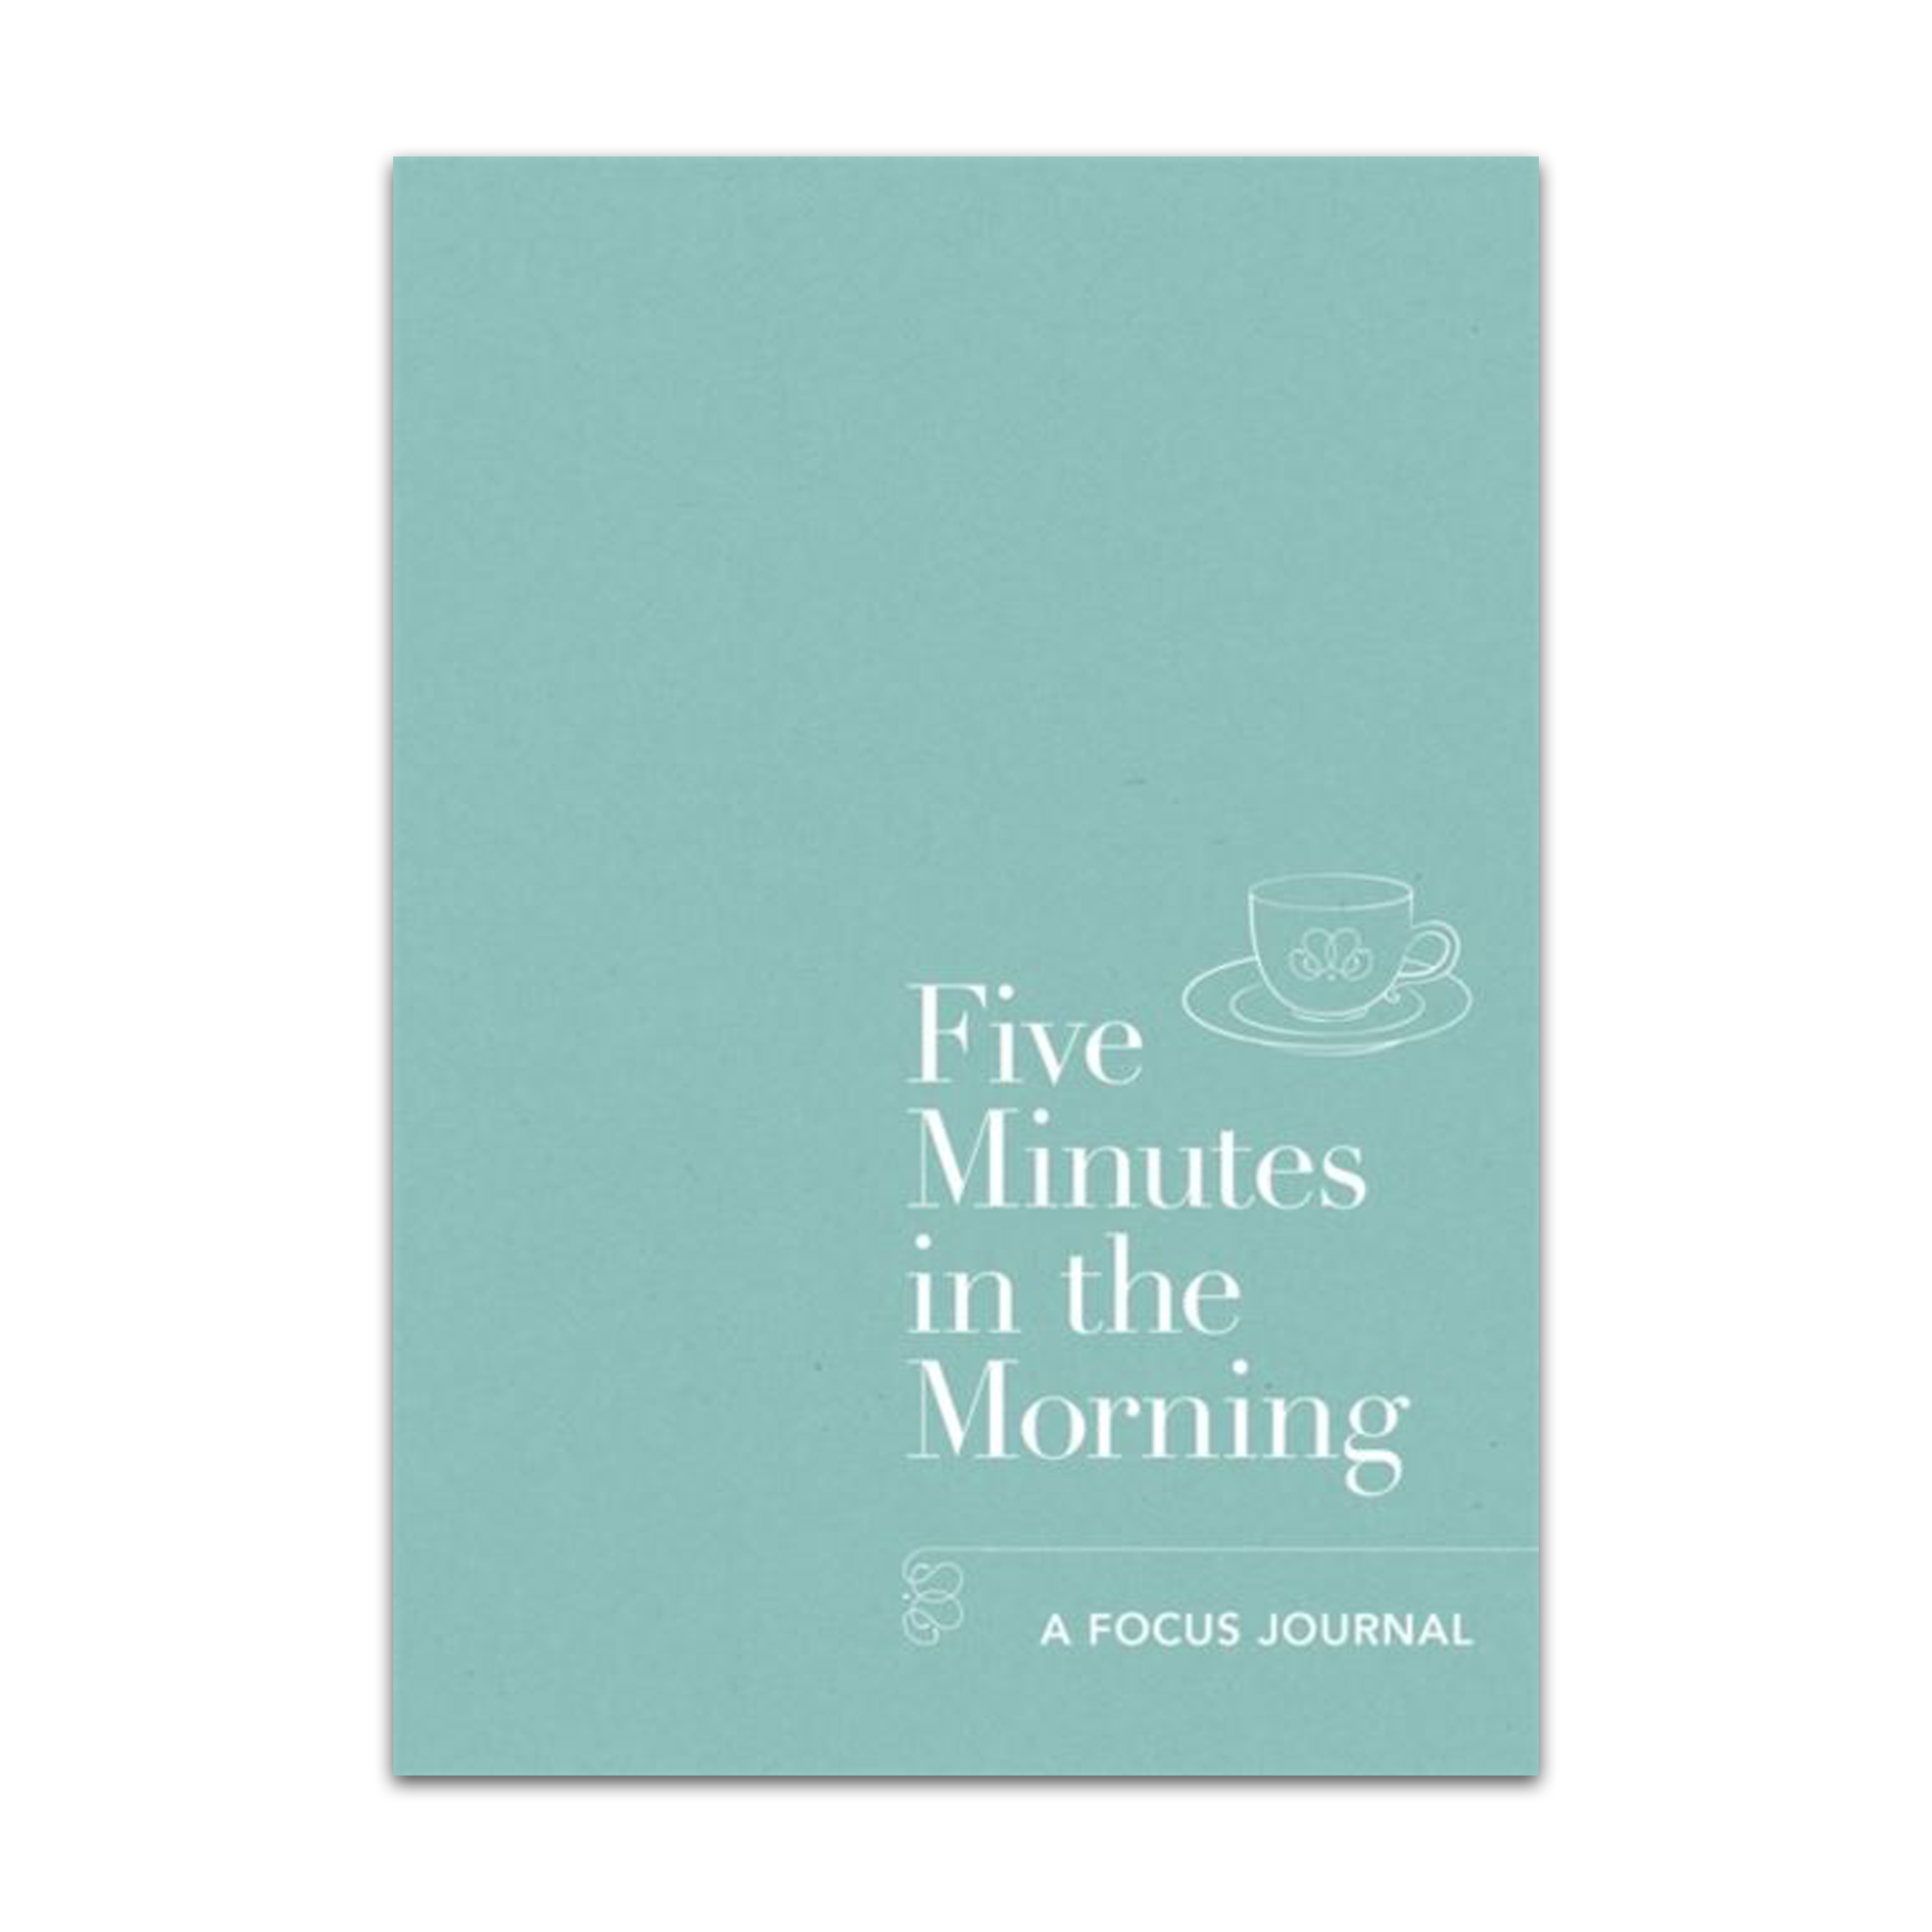 Teal front cover of Five Minutes in the Morning Journal